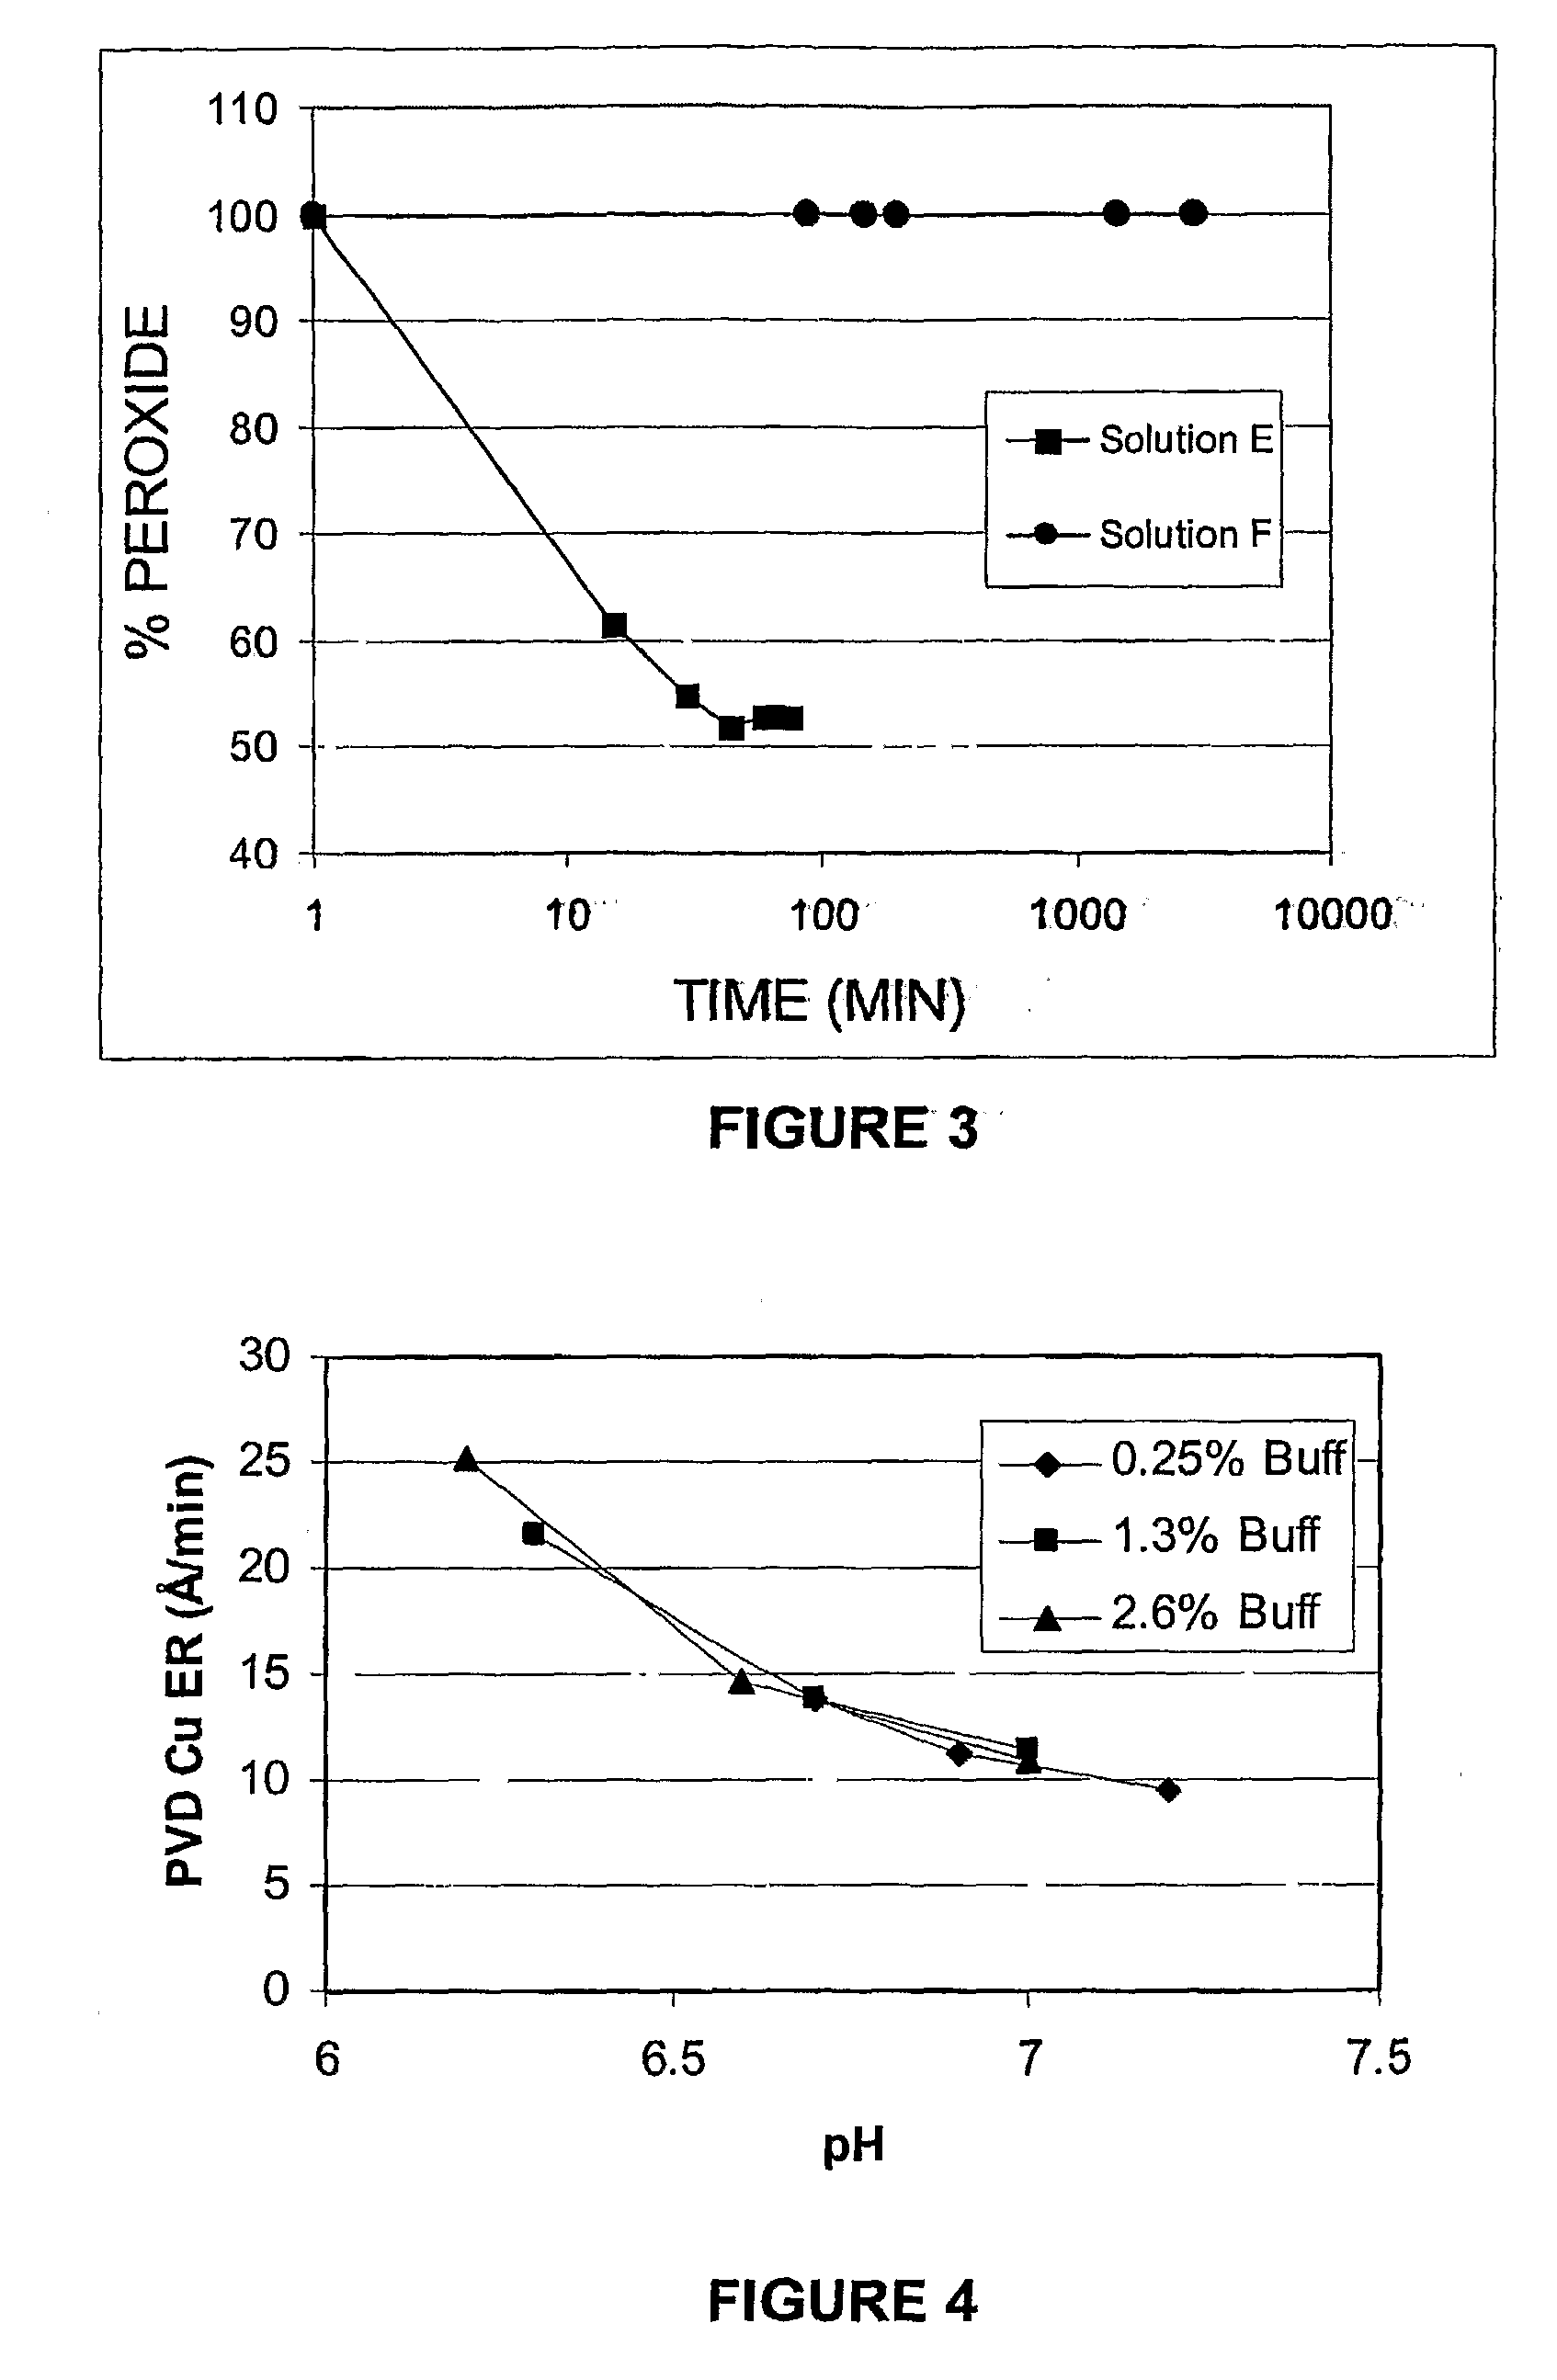 Oxidizing aqueous cleaner for the removal of post-etch residues